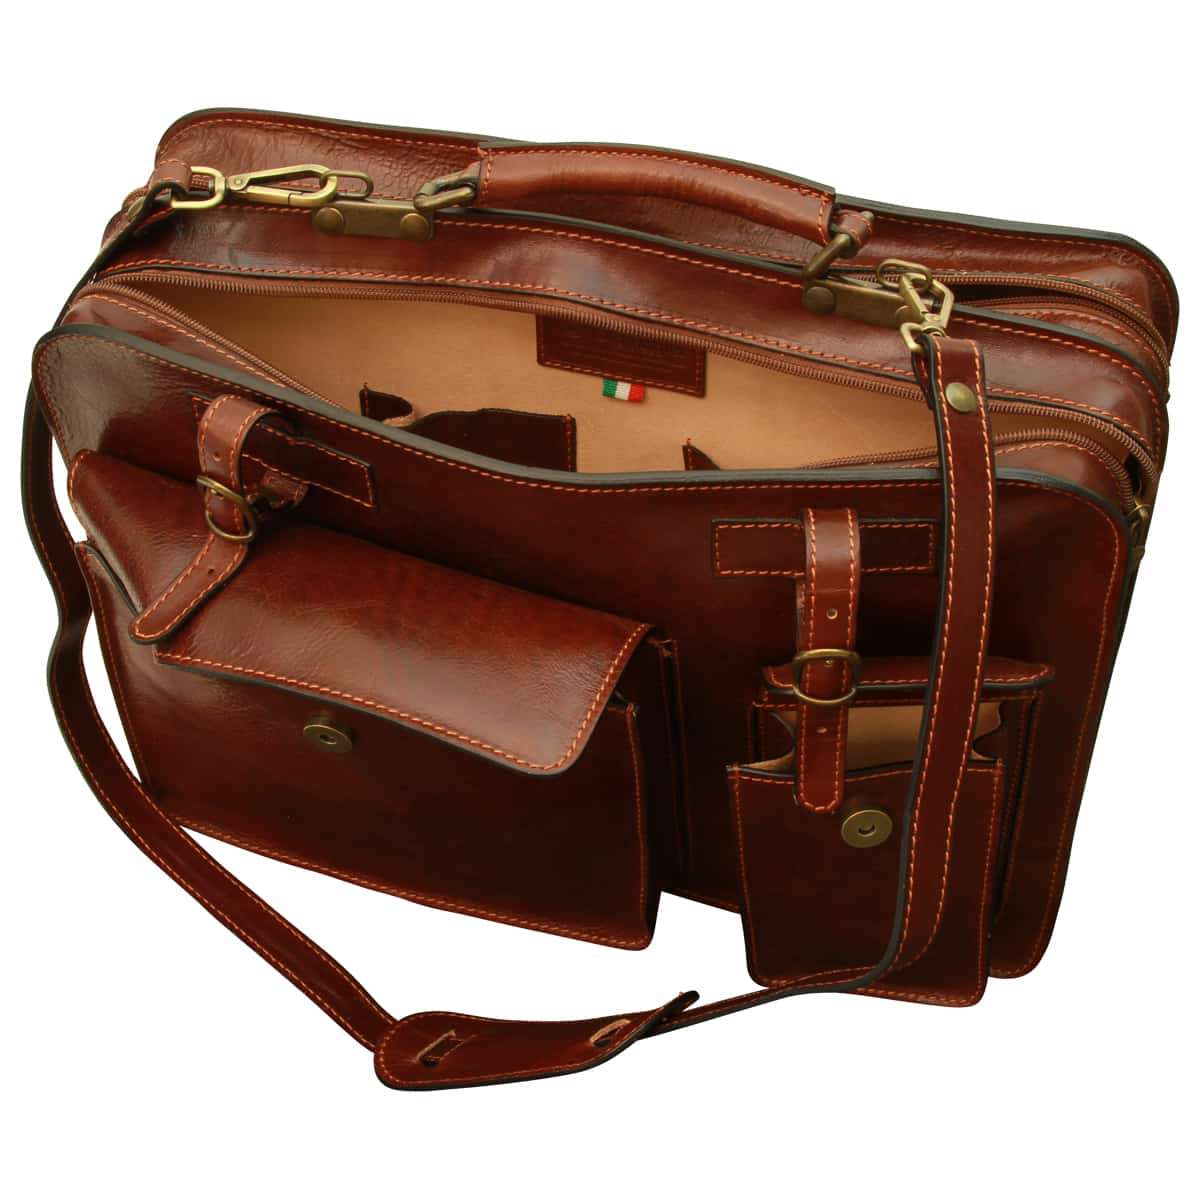 Leather Briefcase with belt straps - Brown | 006205MA | EURO | Old Angler Firenze